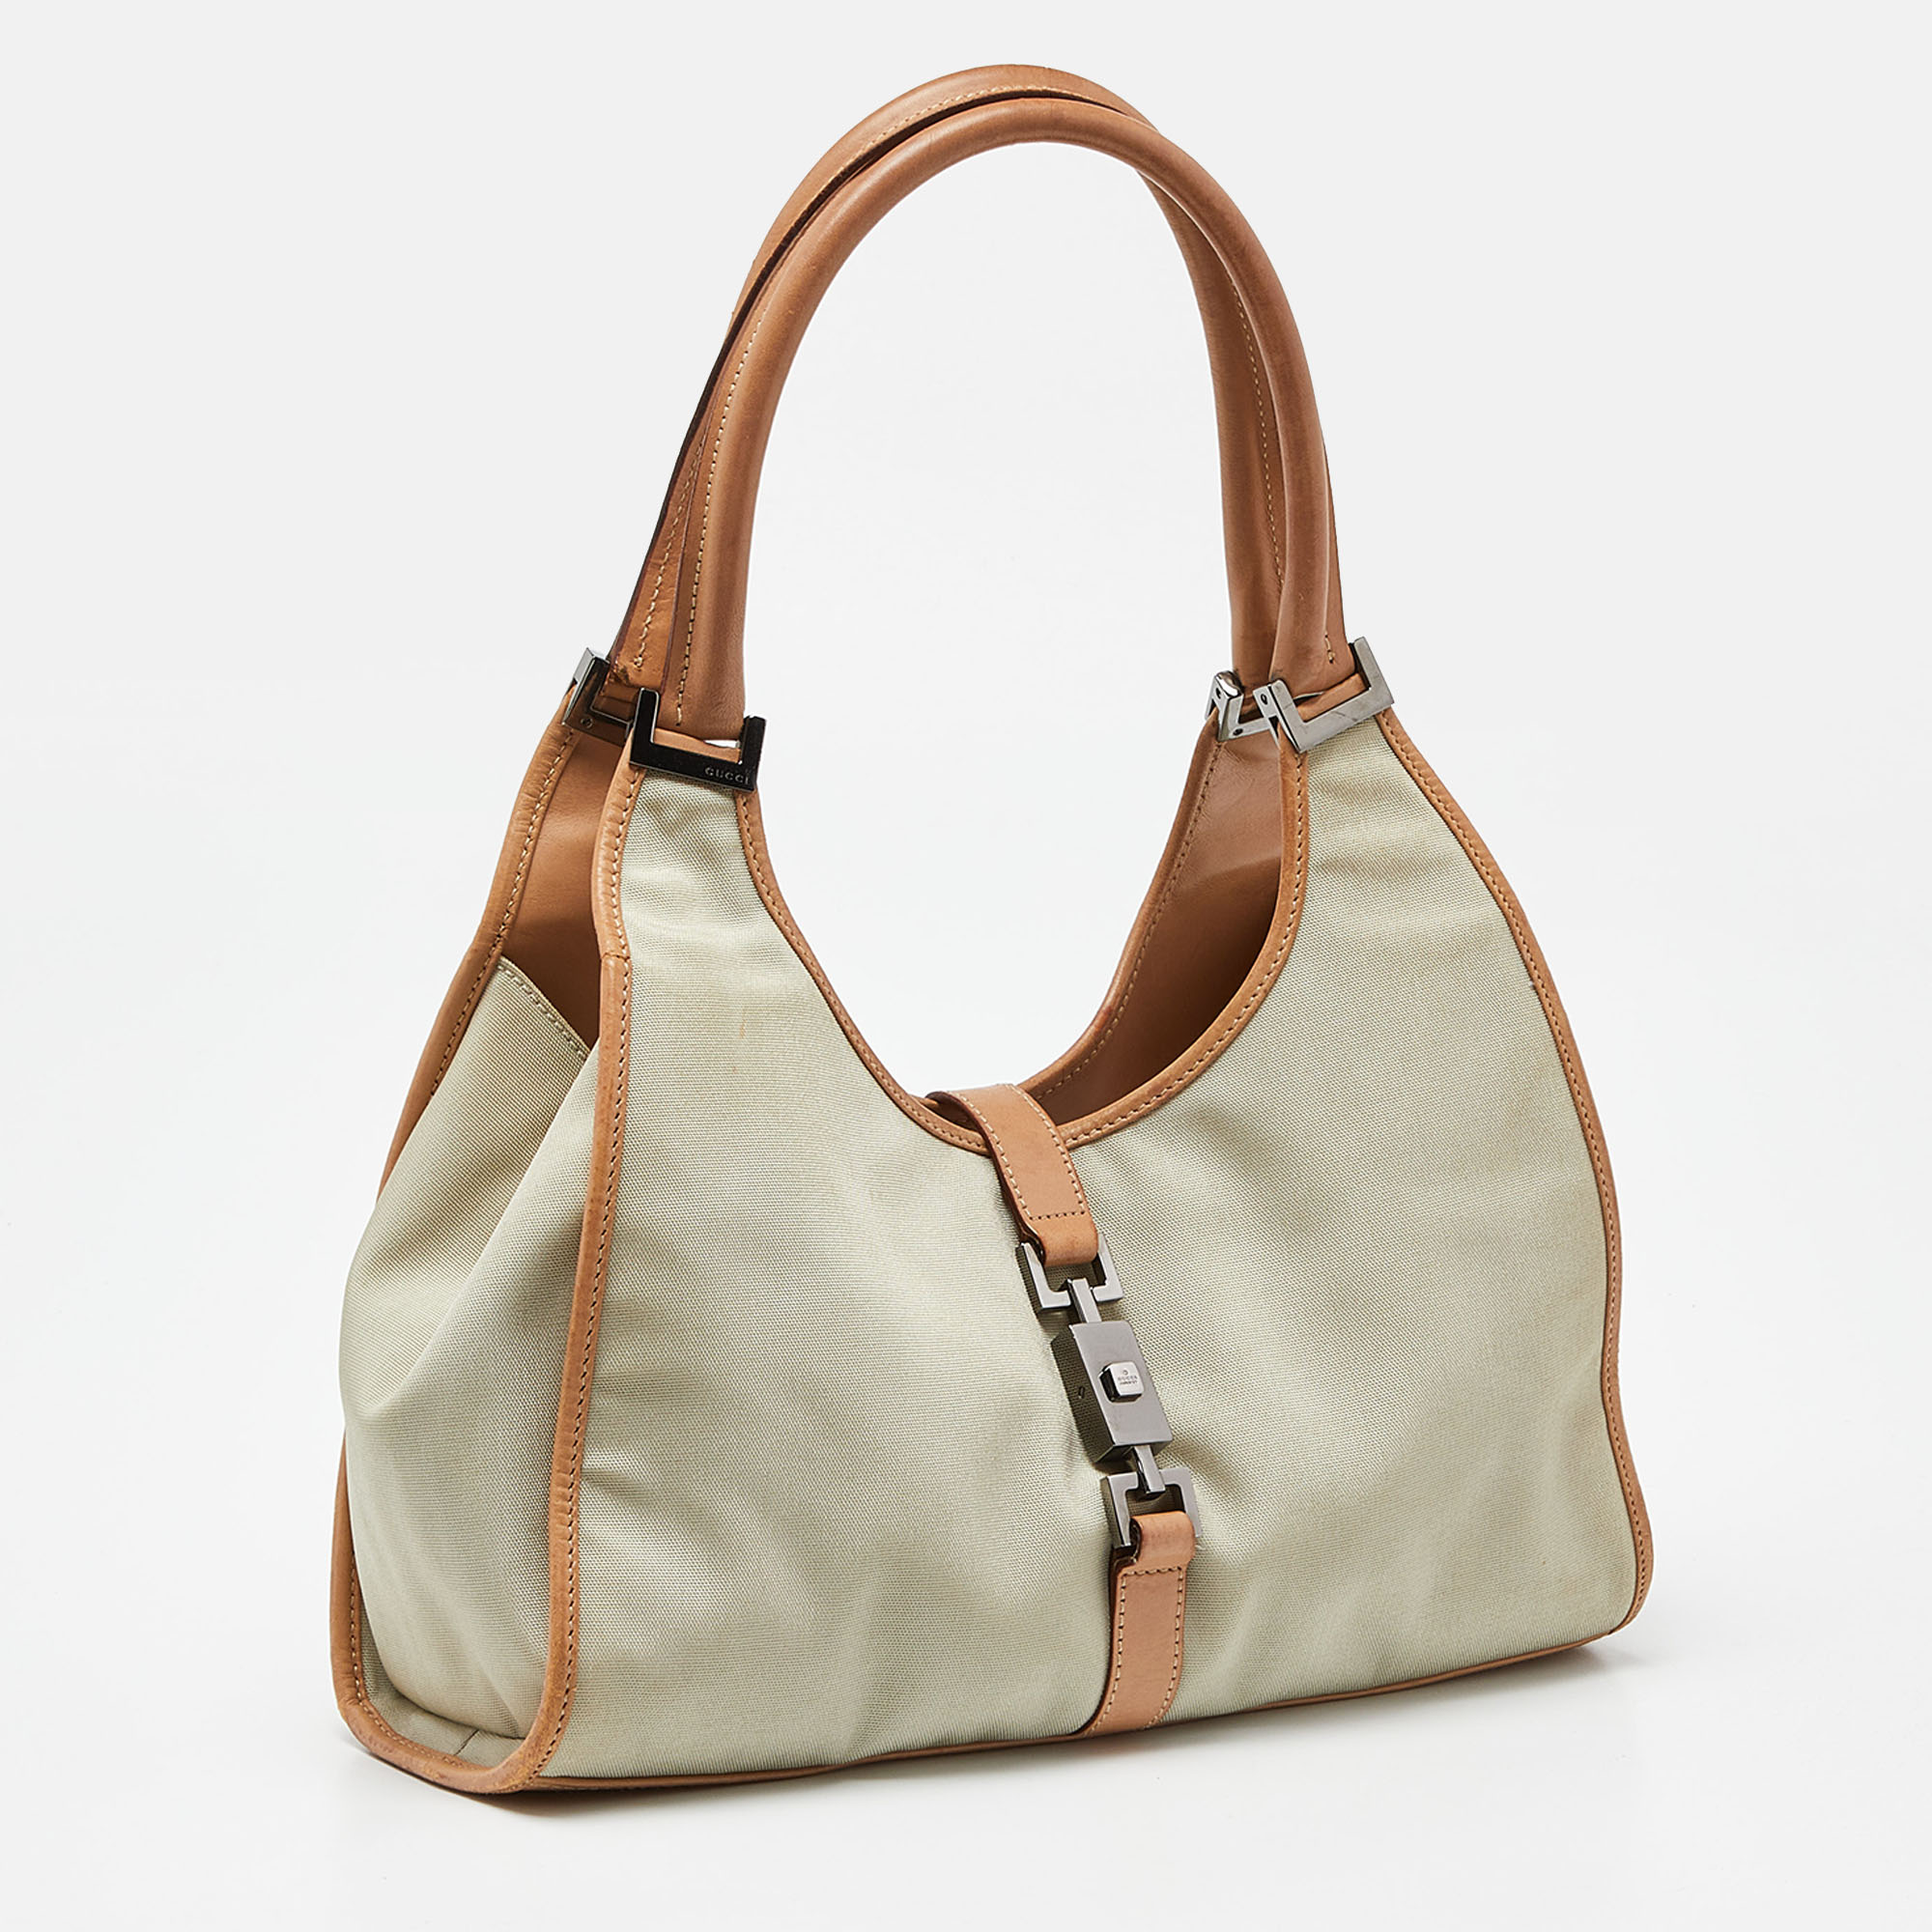 Gucci Beige/Tan Canvas And Leather Jackie Tote